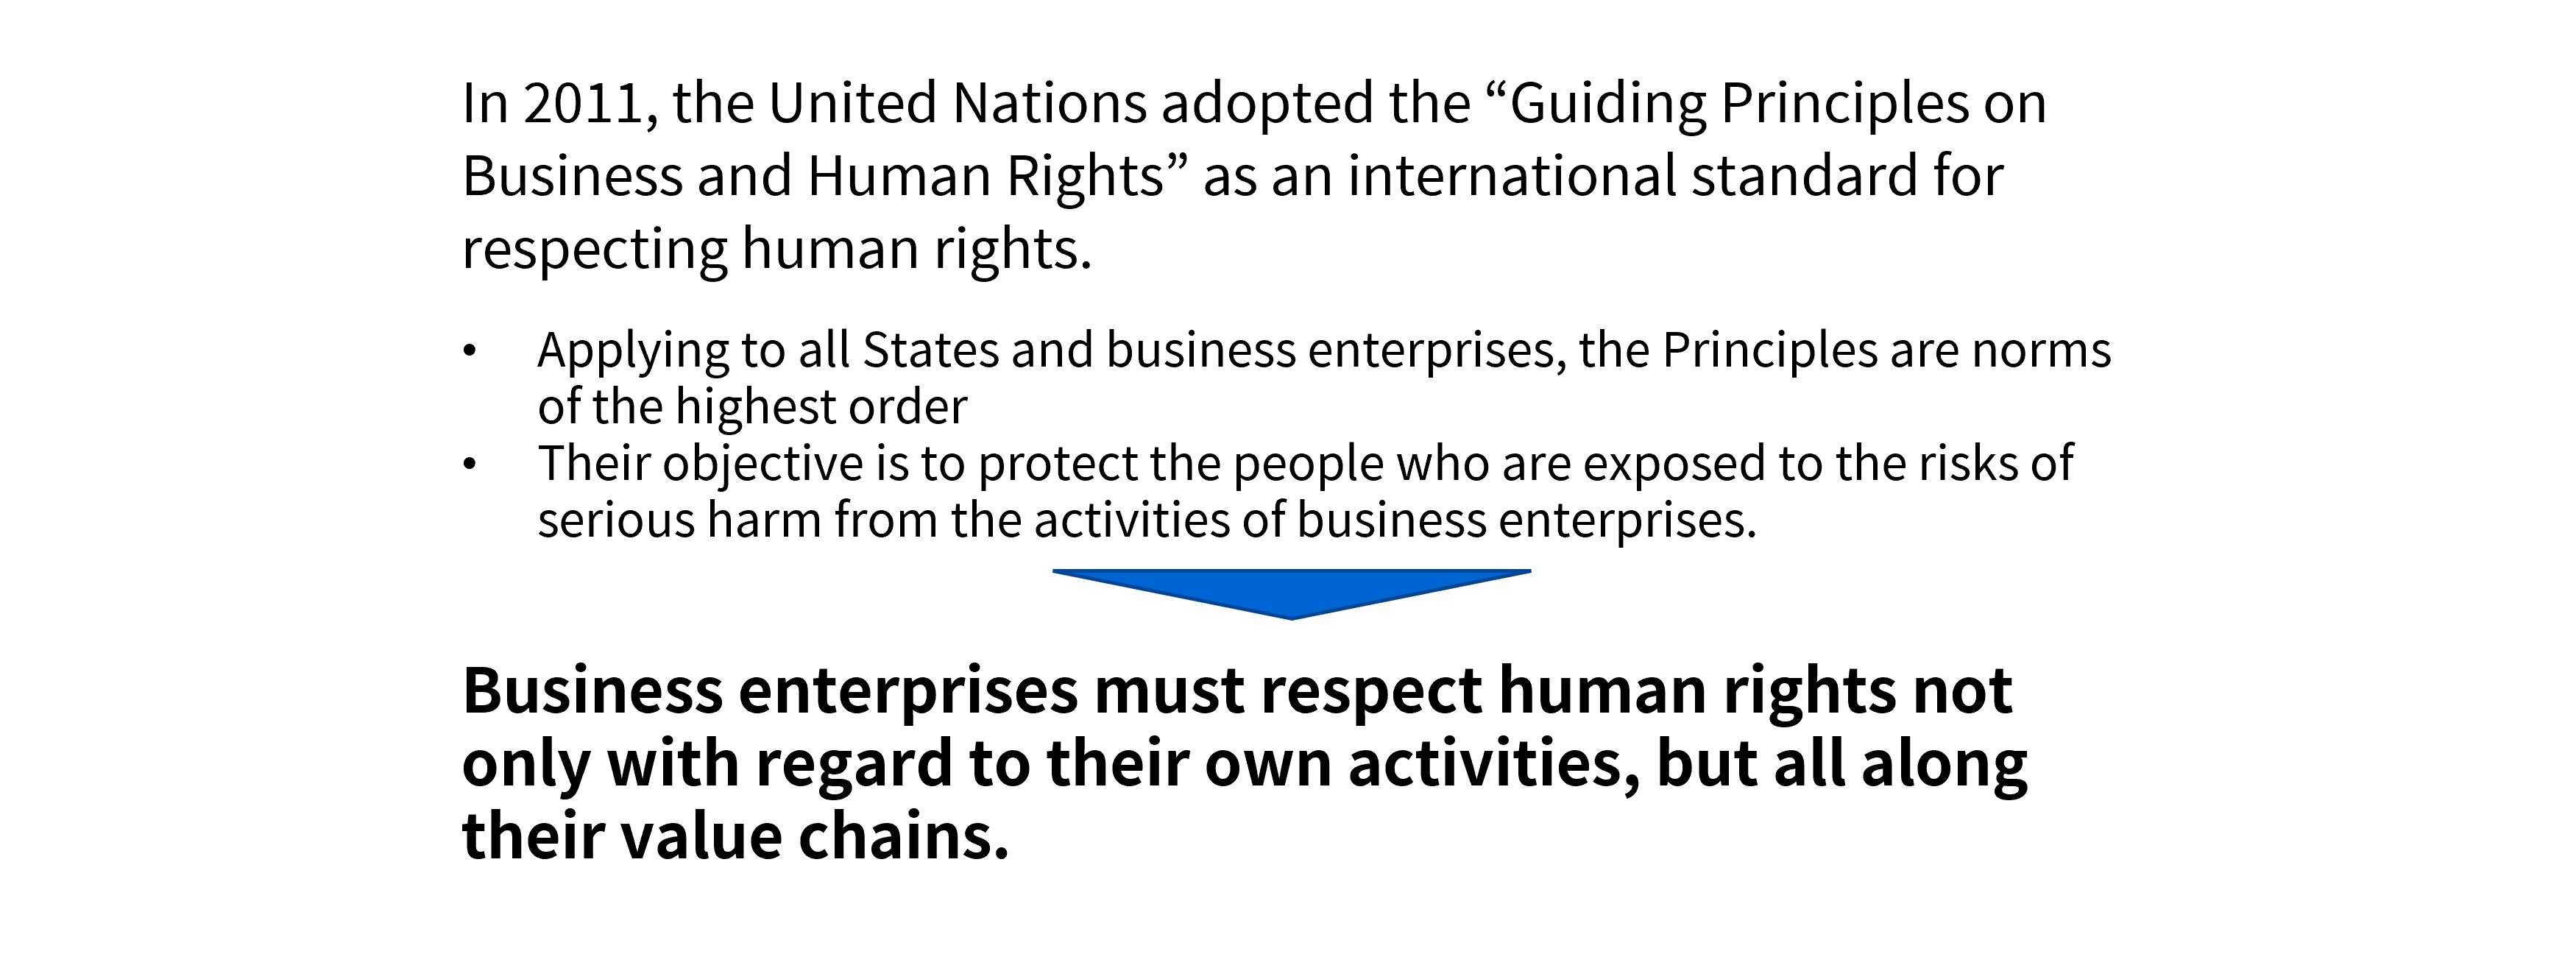 In a global society, respect for human rights is essential for doing business